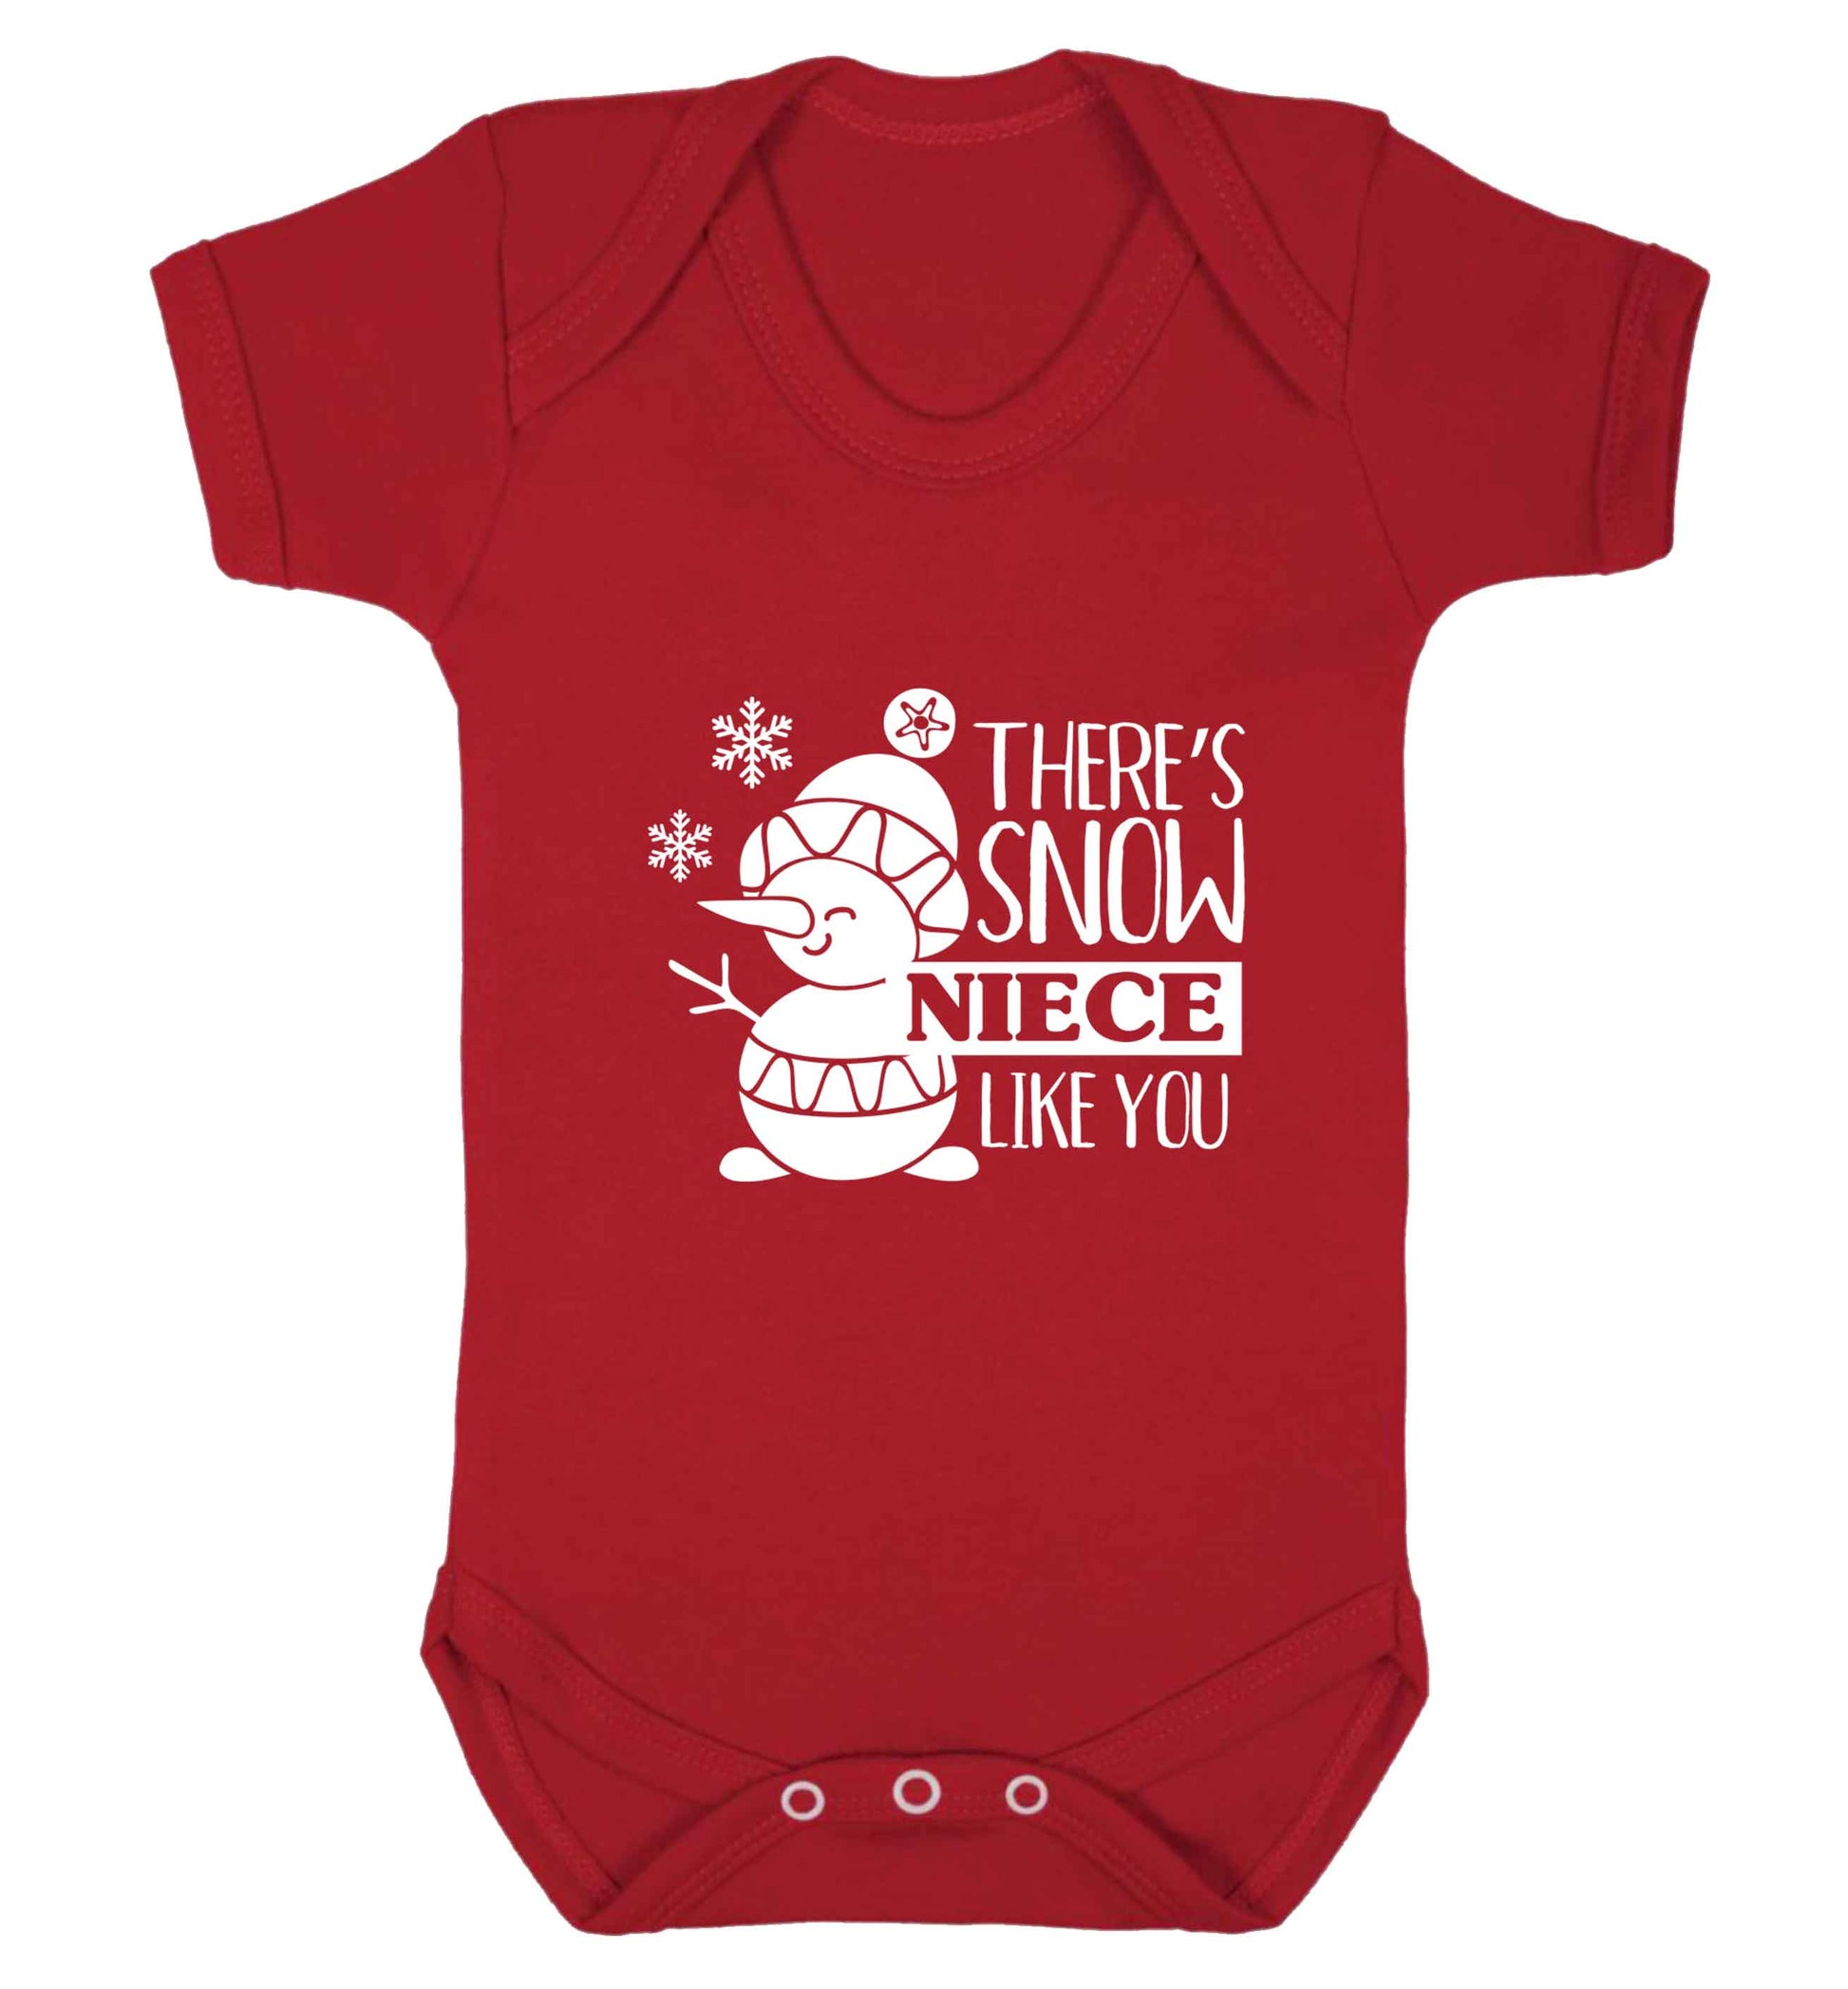 There's snow niece like you baby vest red 18-24 months